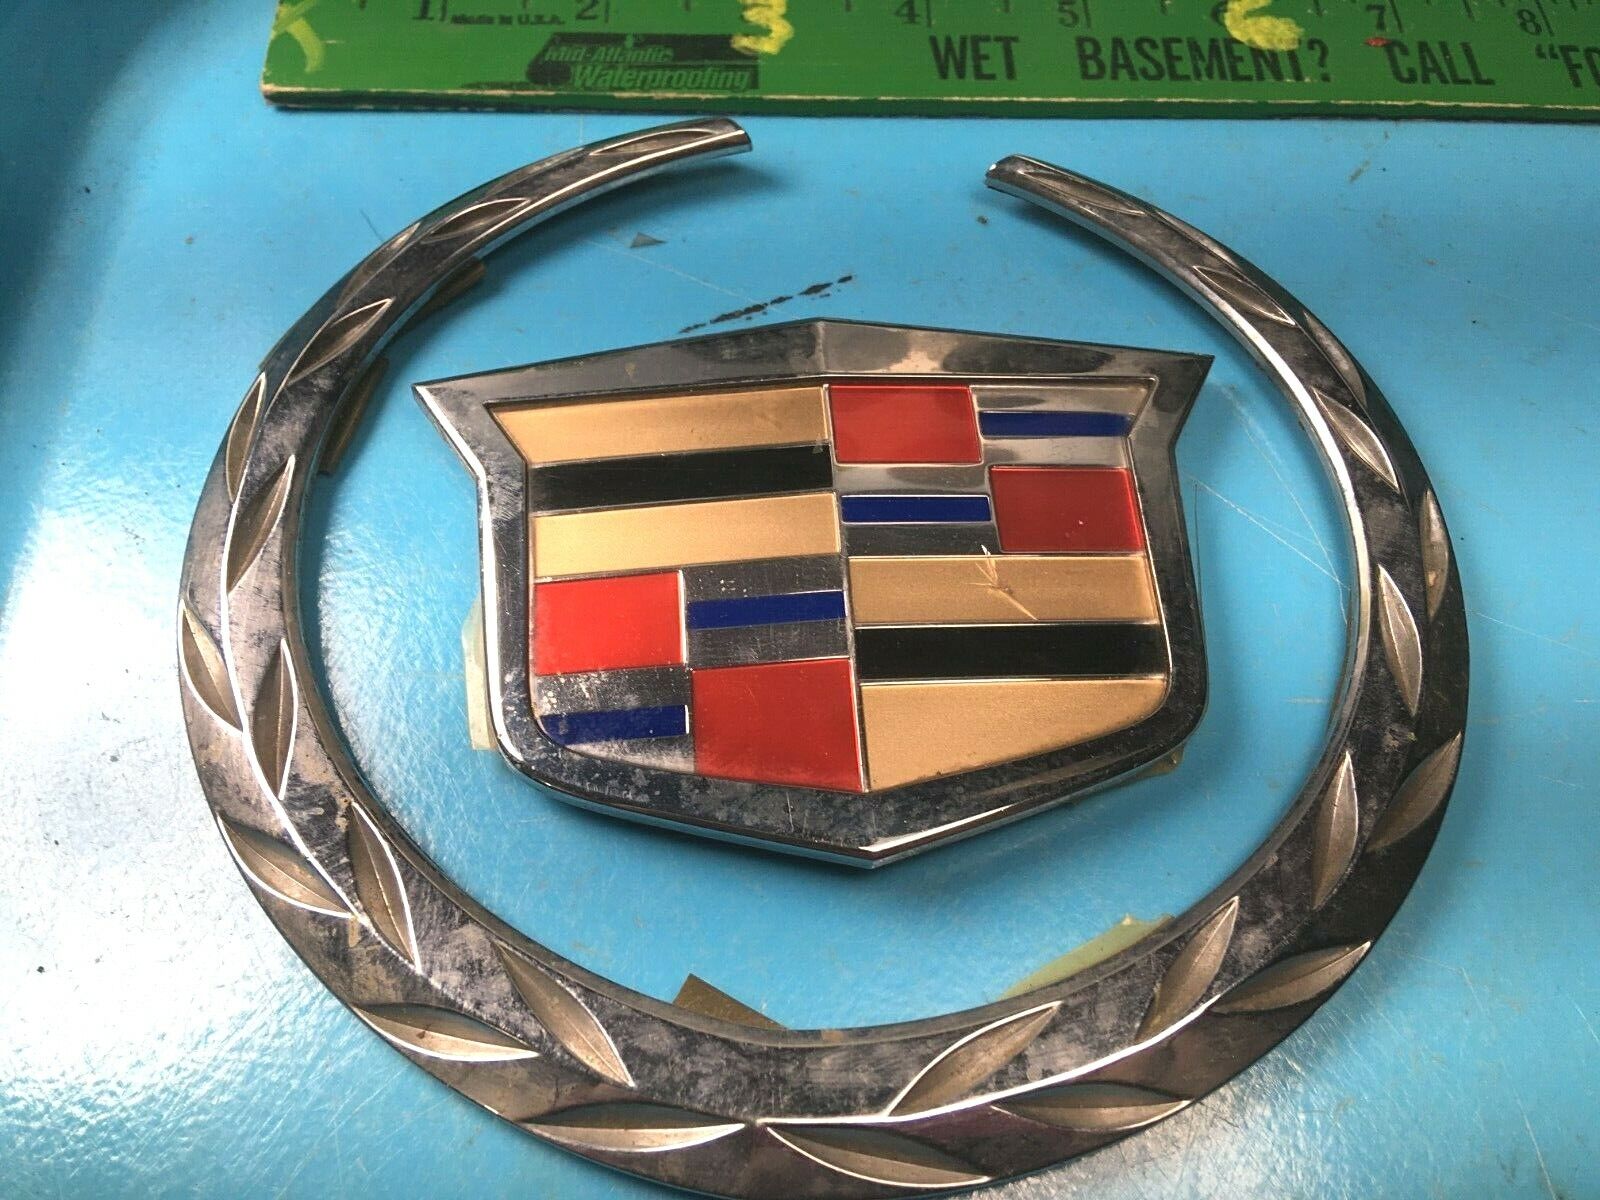 used emblem, caddillac seven inch ring and shield, used good, small rock crack,